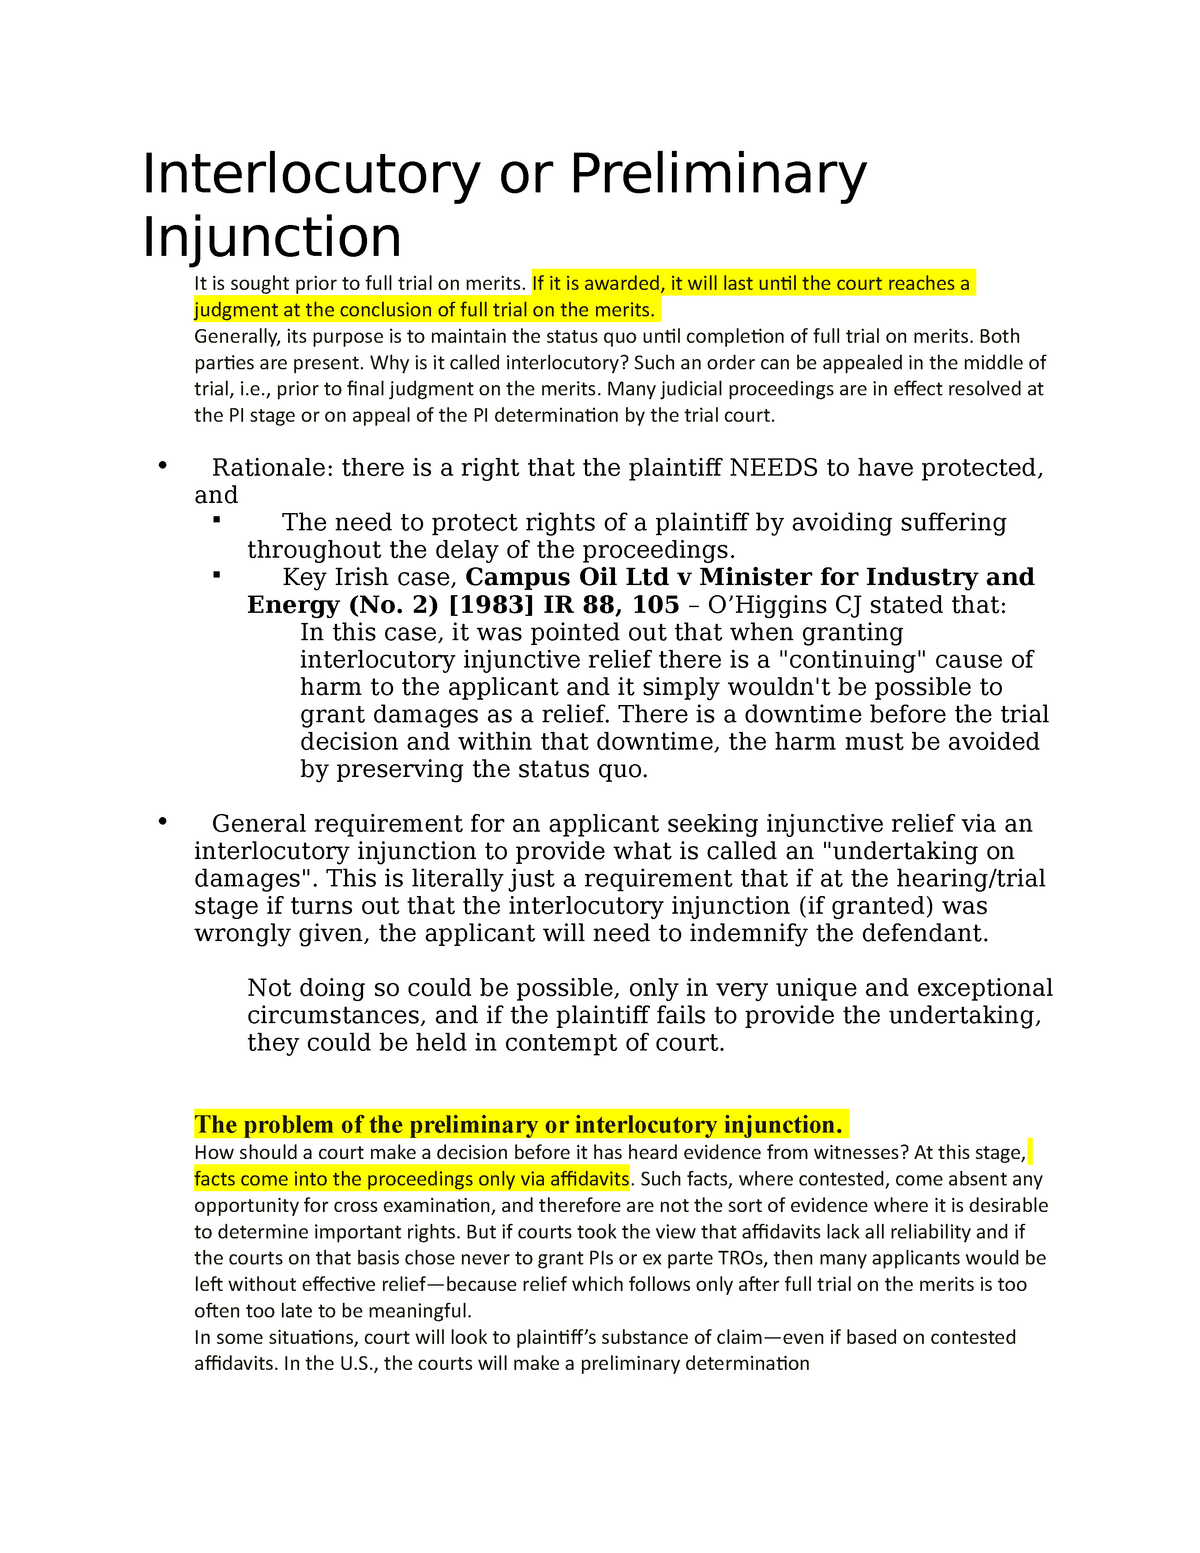 Interlocutory or Preliminary Injunction If it is awarded it will